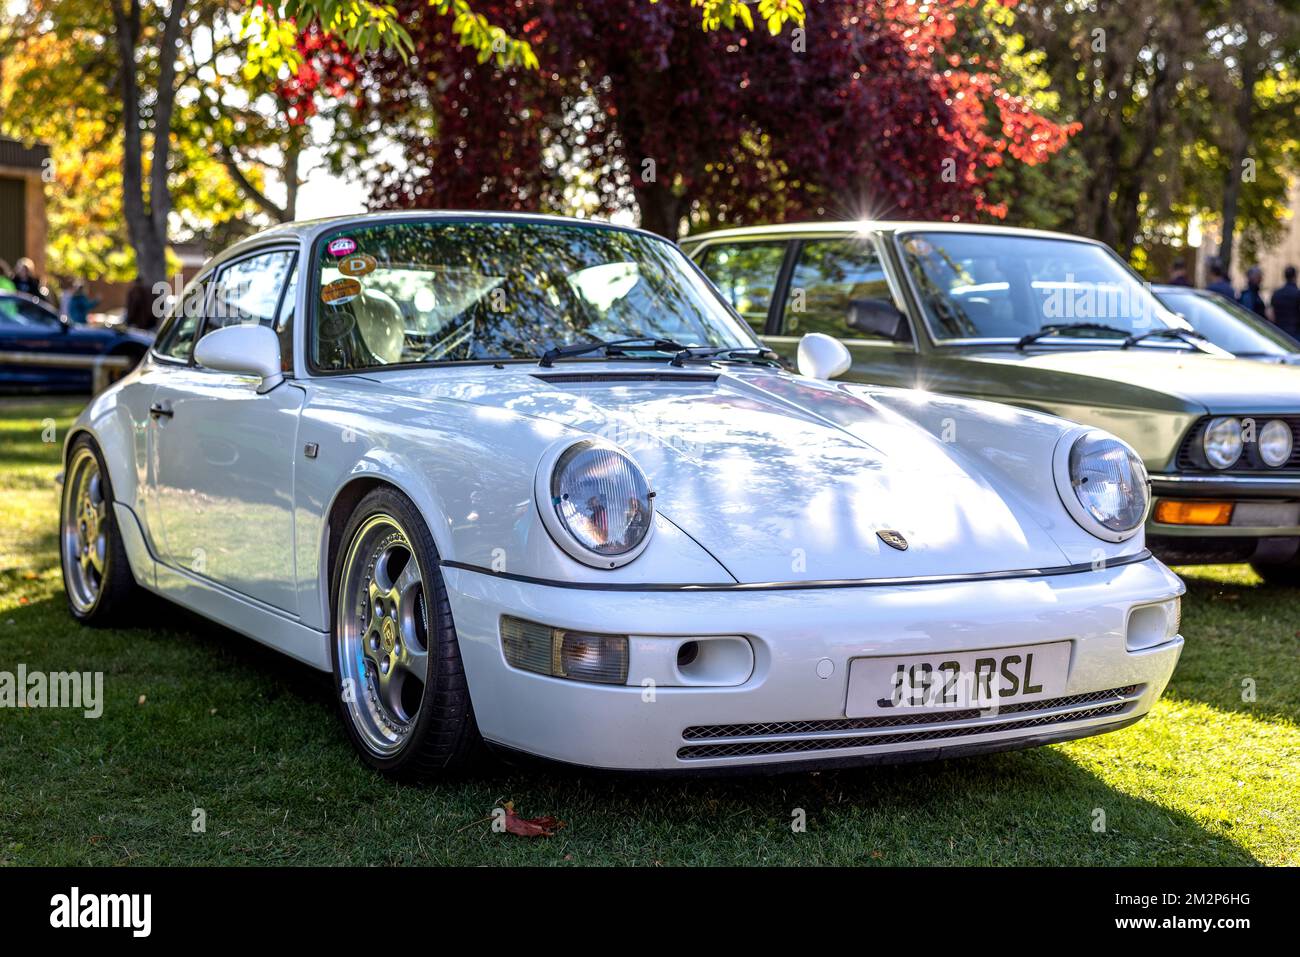 1991 Porsche 911 RS ‘J92 RSL’ on display at the October Scramble held at the Bicester Heritage Centre on the 9th October 2022. Stock Photo